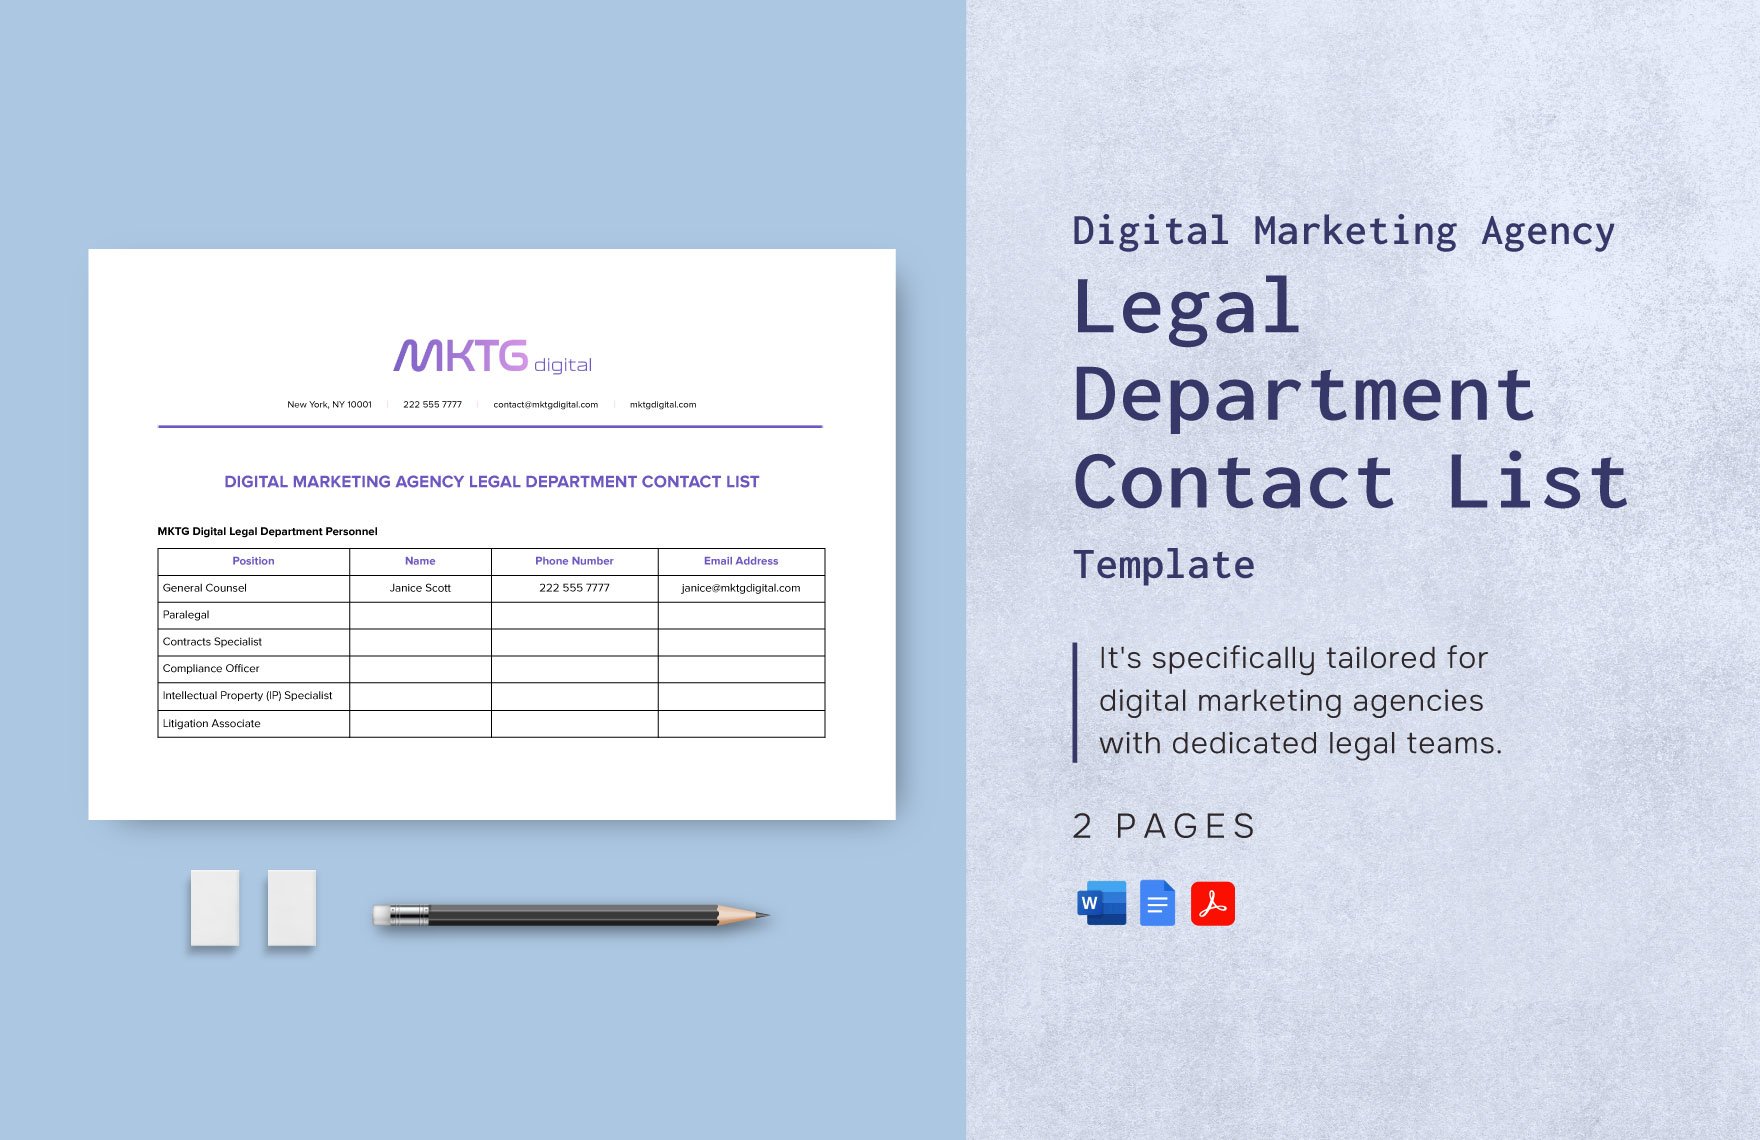 Digital Marketing Agency Legal Department Contact List Template